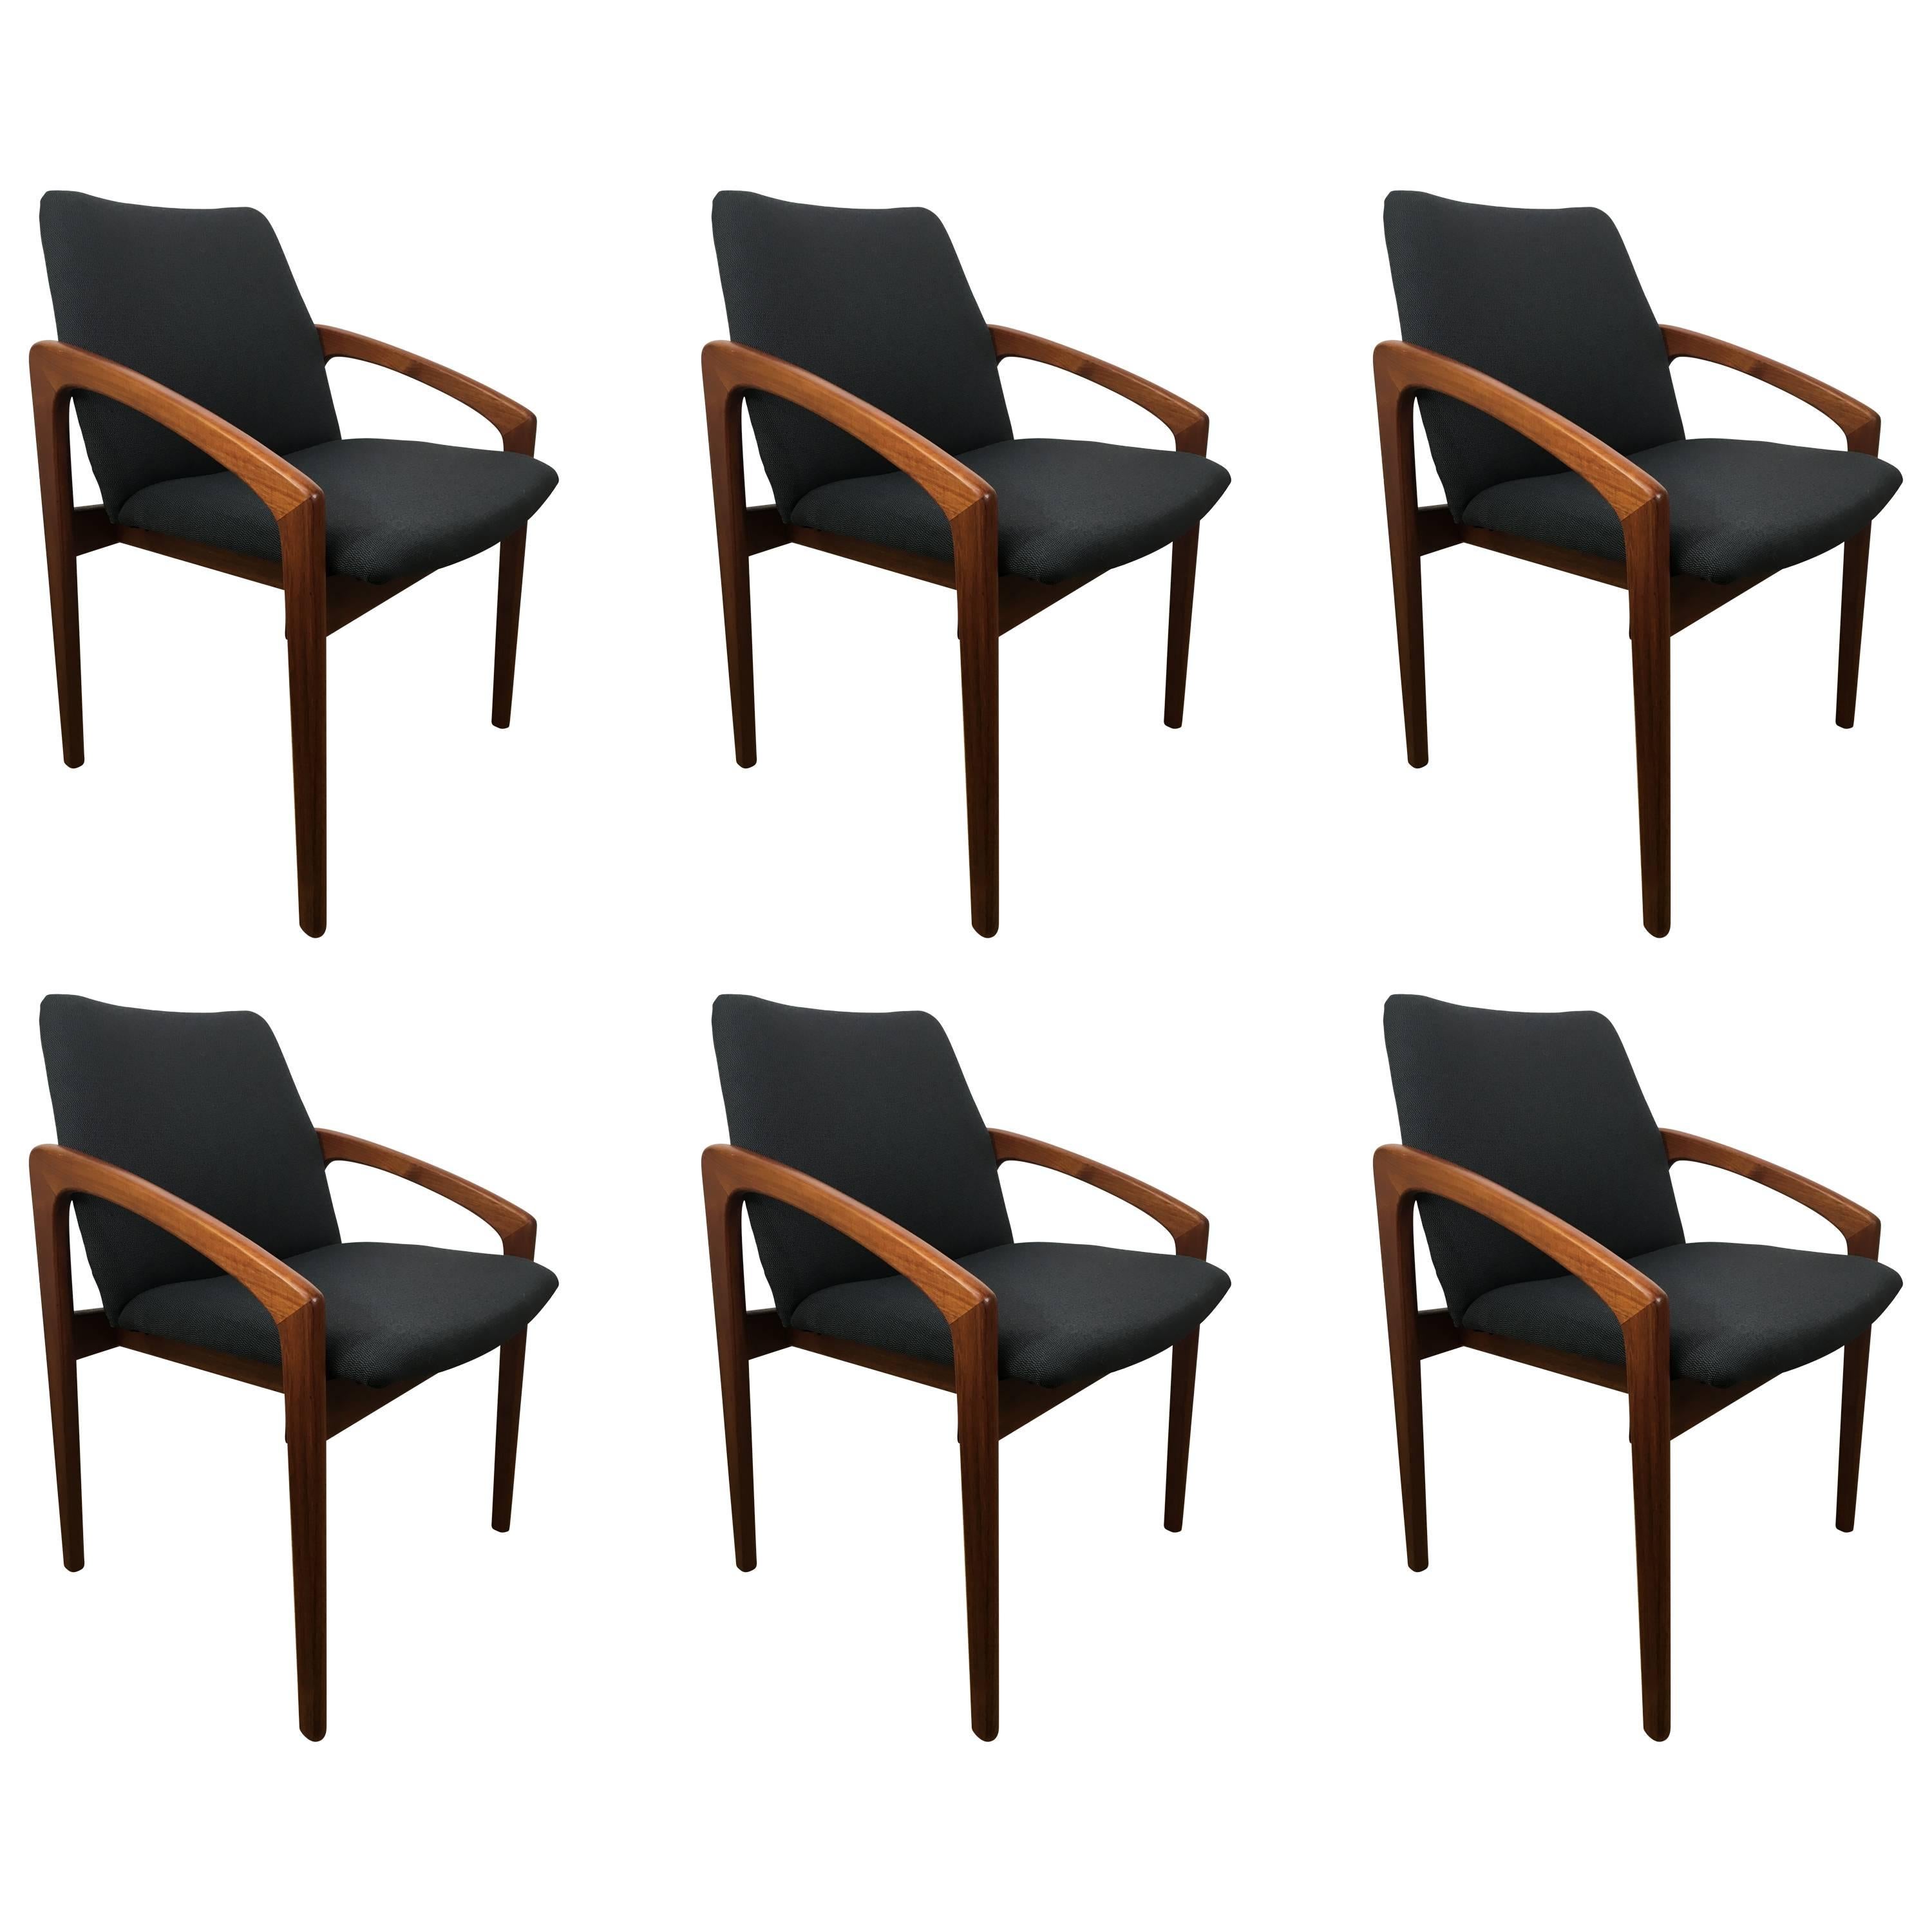 Mid-20th Century Six Danish Modern, Teak Cantilever Dining Chairs For Sale